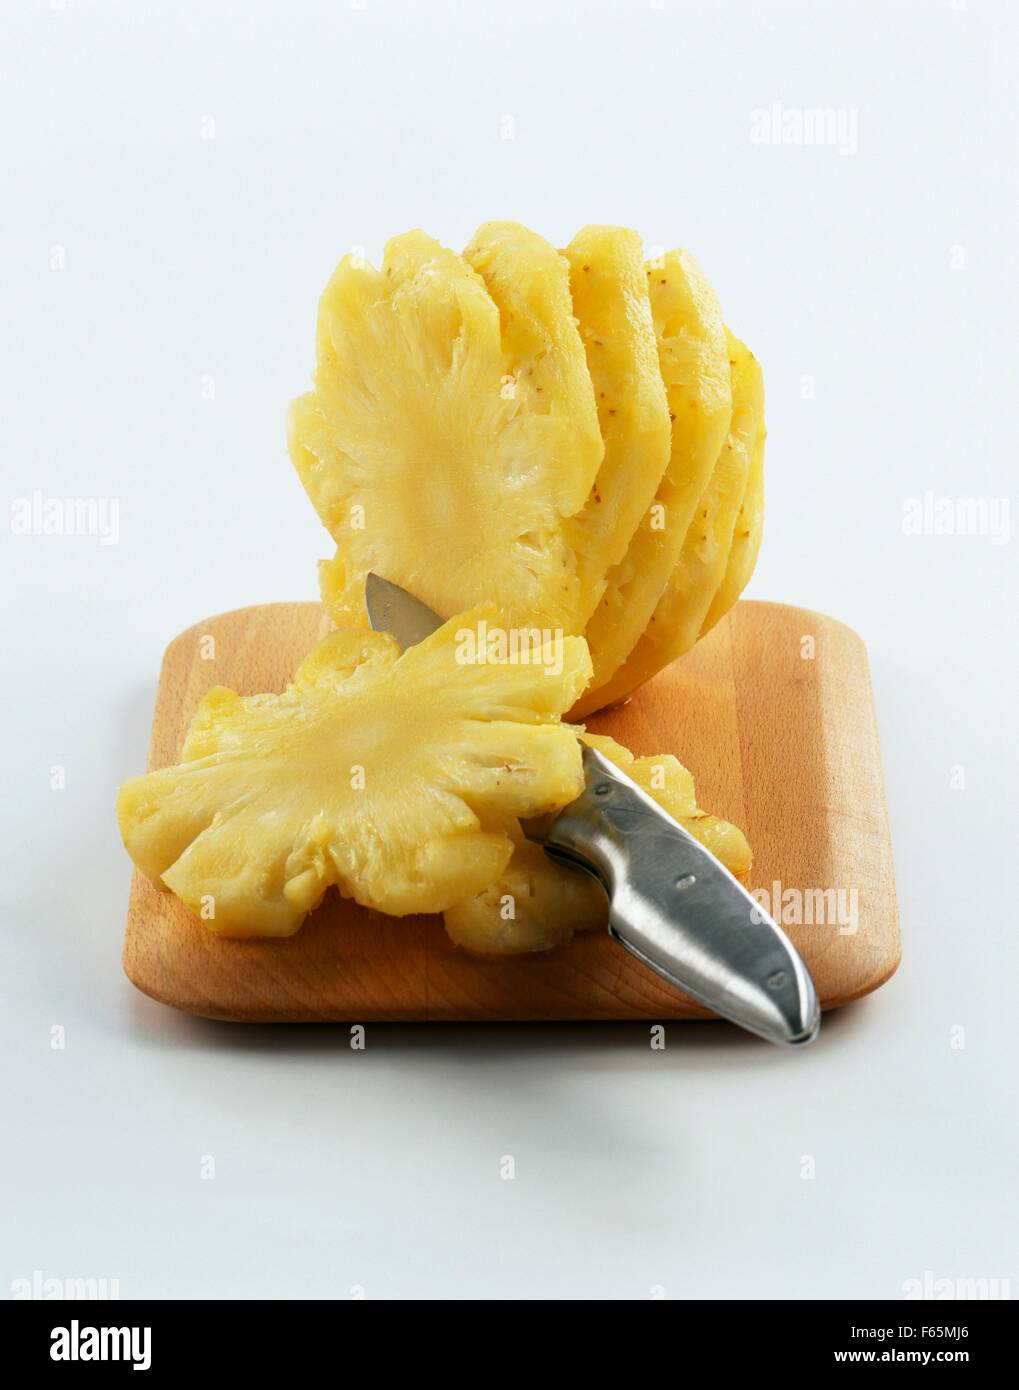 Slicing a pineapple Stock Photo